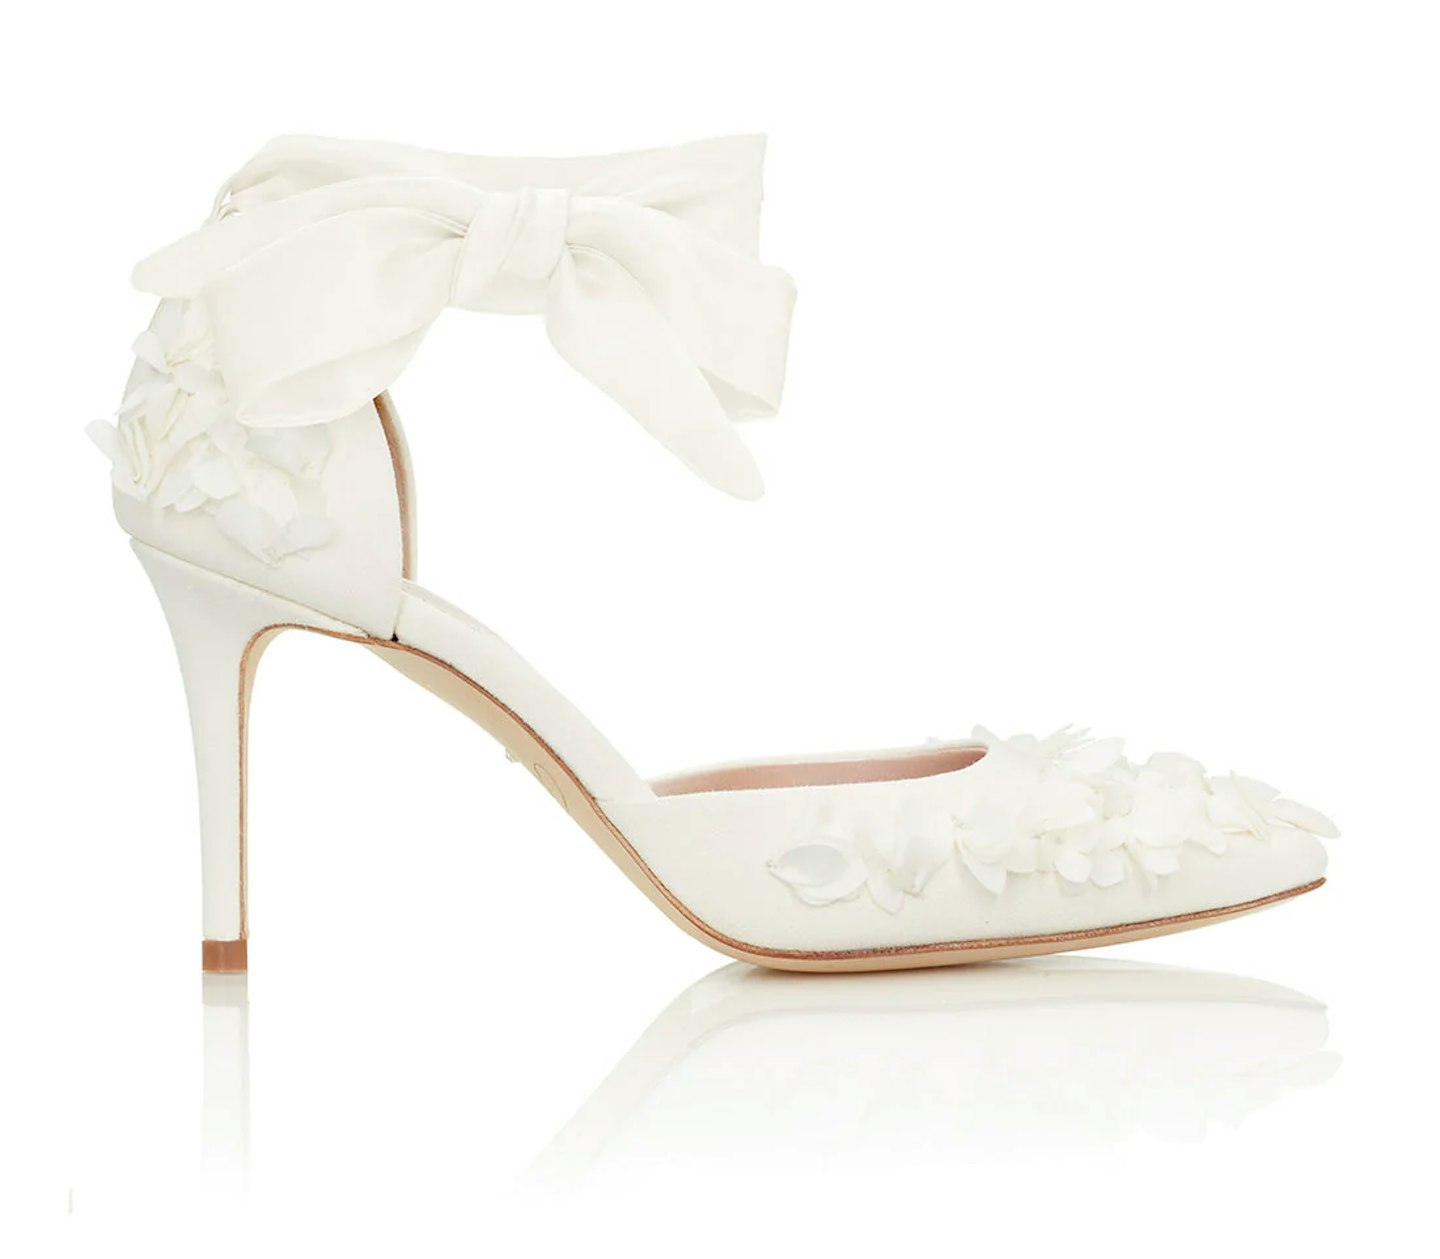 Emmy London, Overlay Suede Bridal Shoes